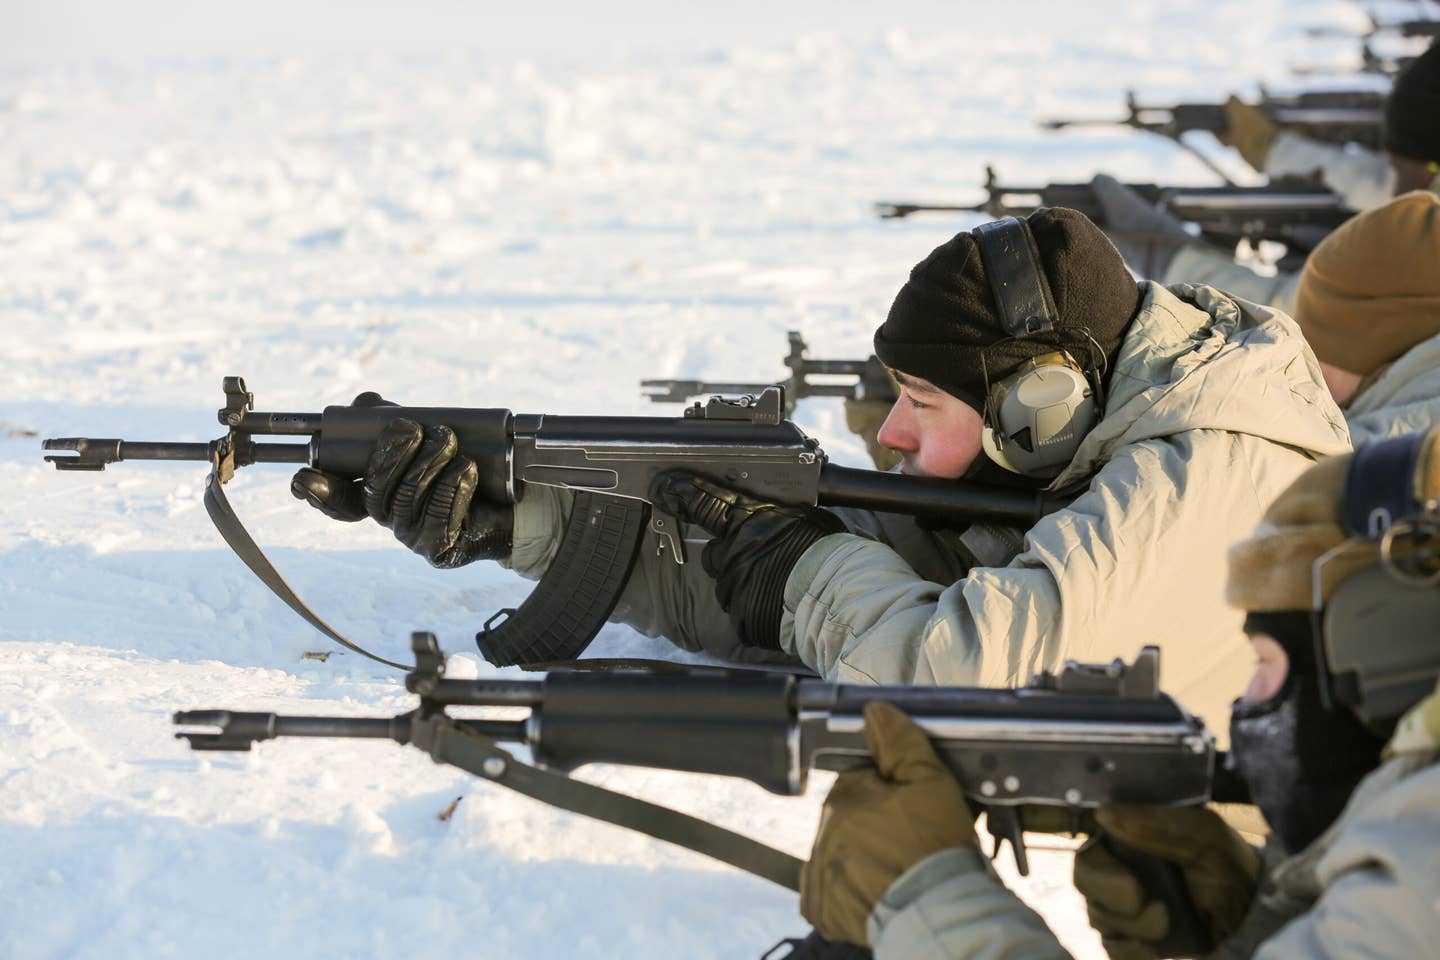 US Army soldiers try out Finnish RK62-series rifles on the range while in the country for an exercise. <em>U.S. Army</em>